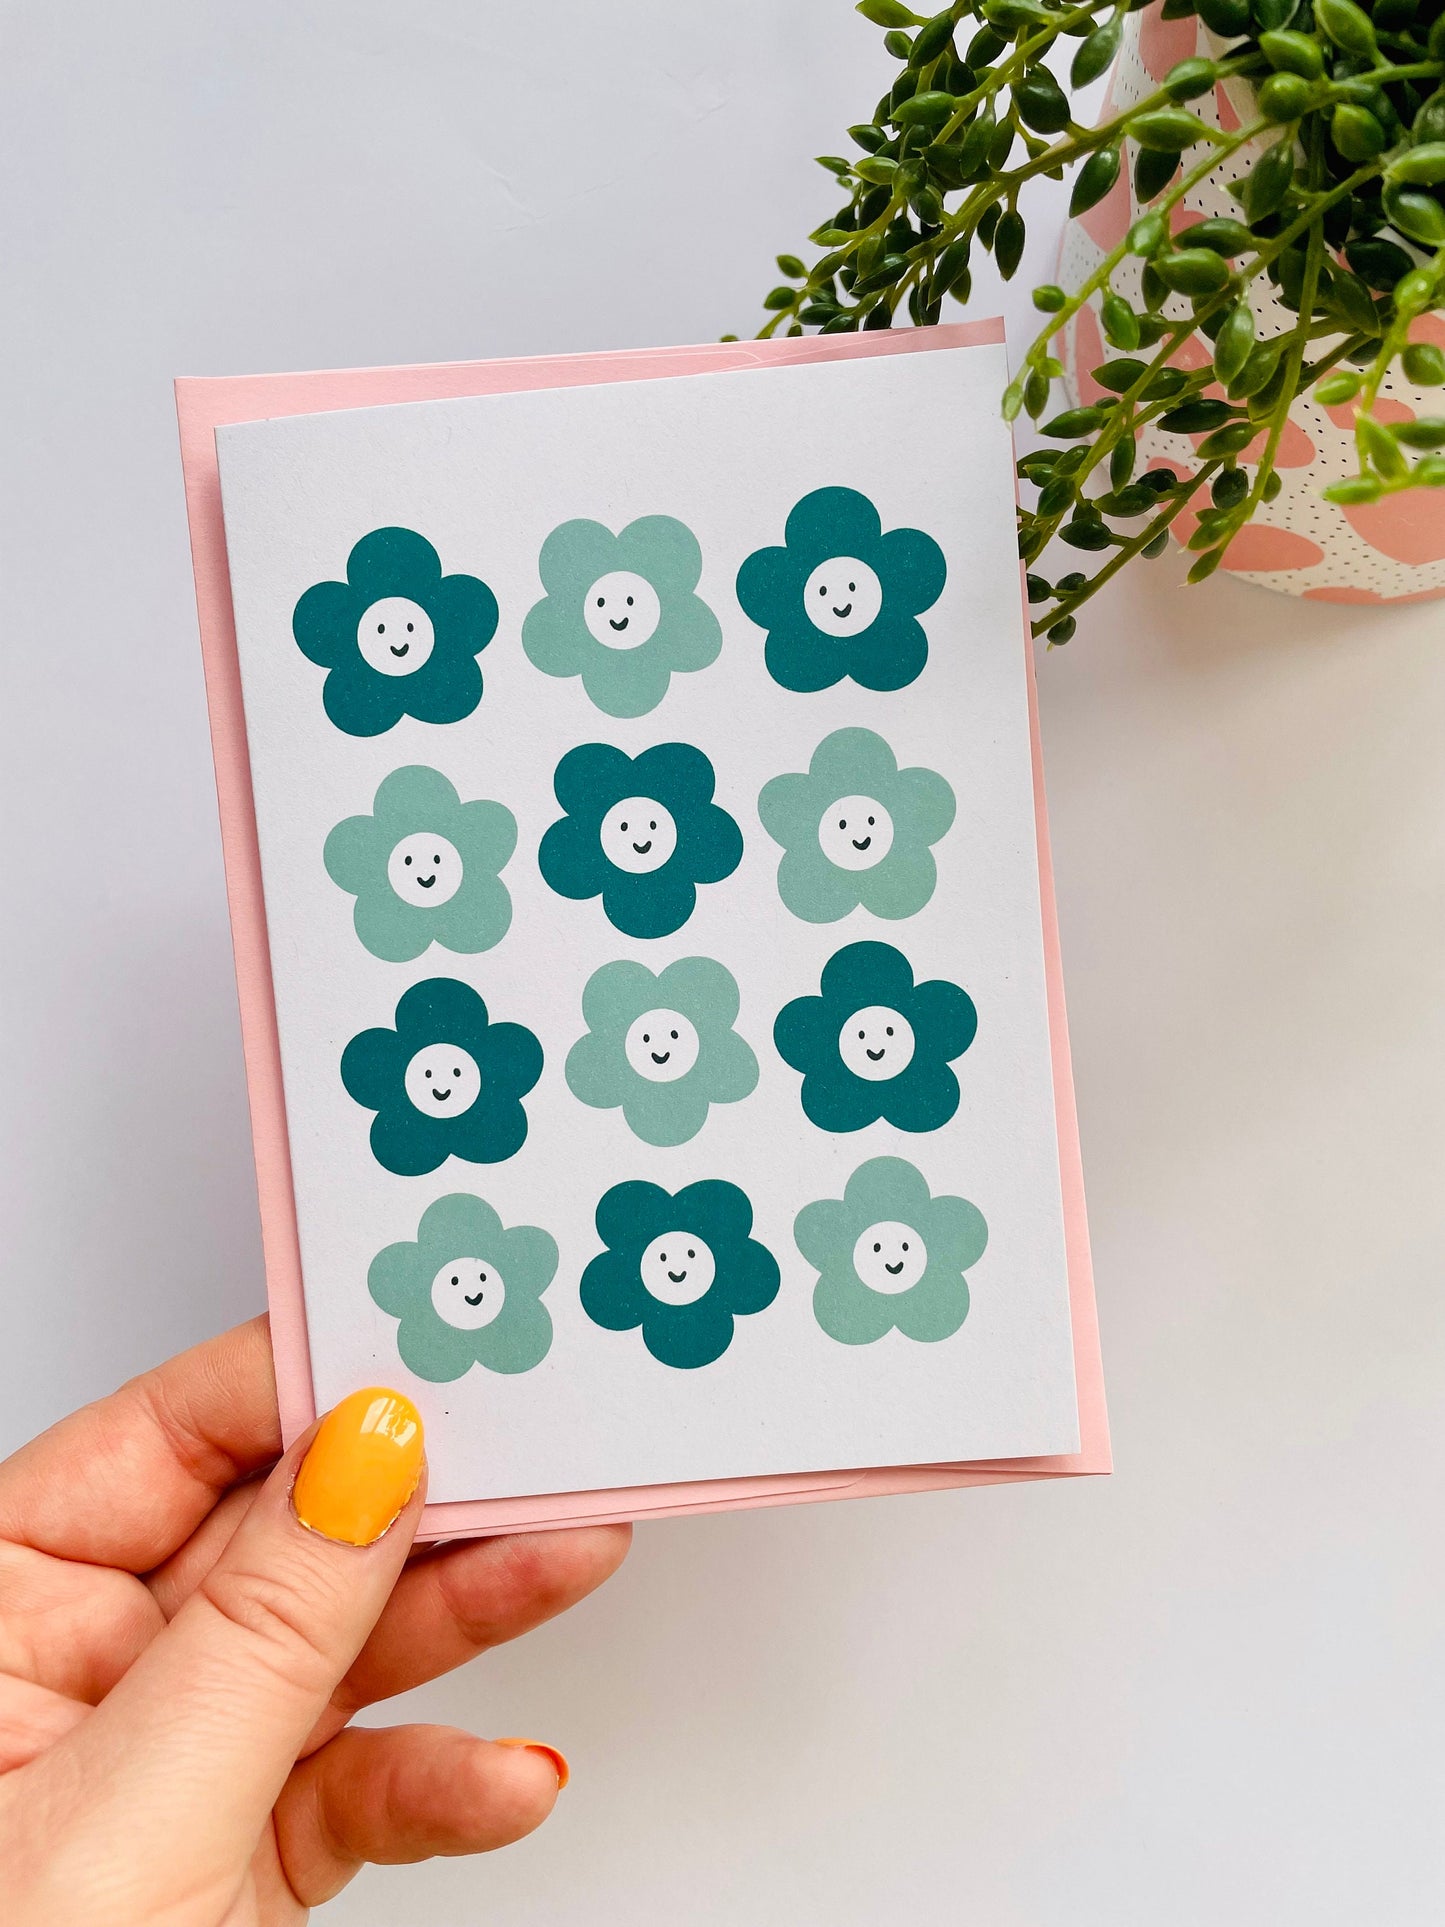 Smiling Flowers A6 Greetings Card